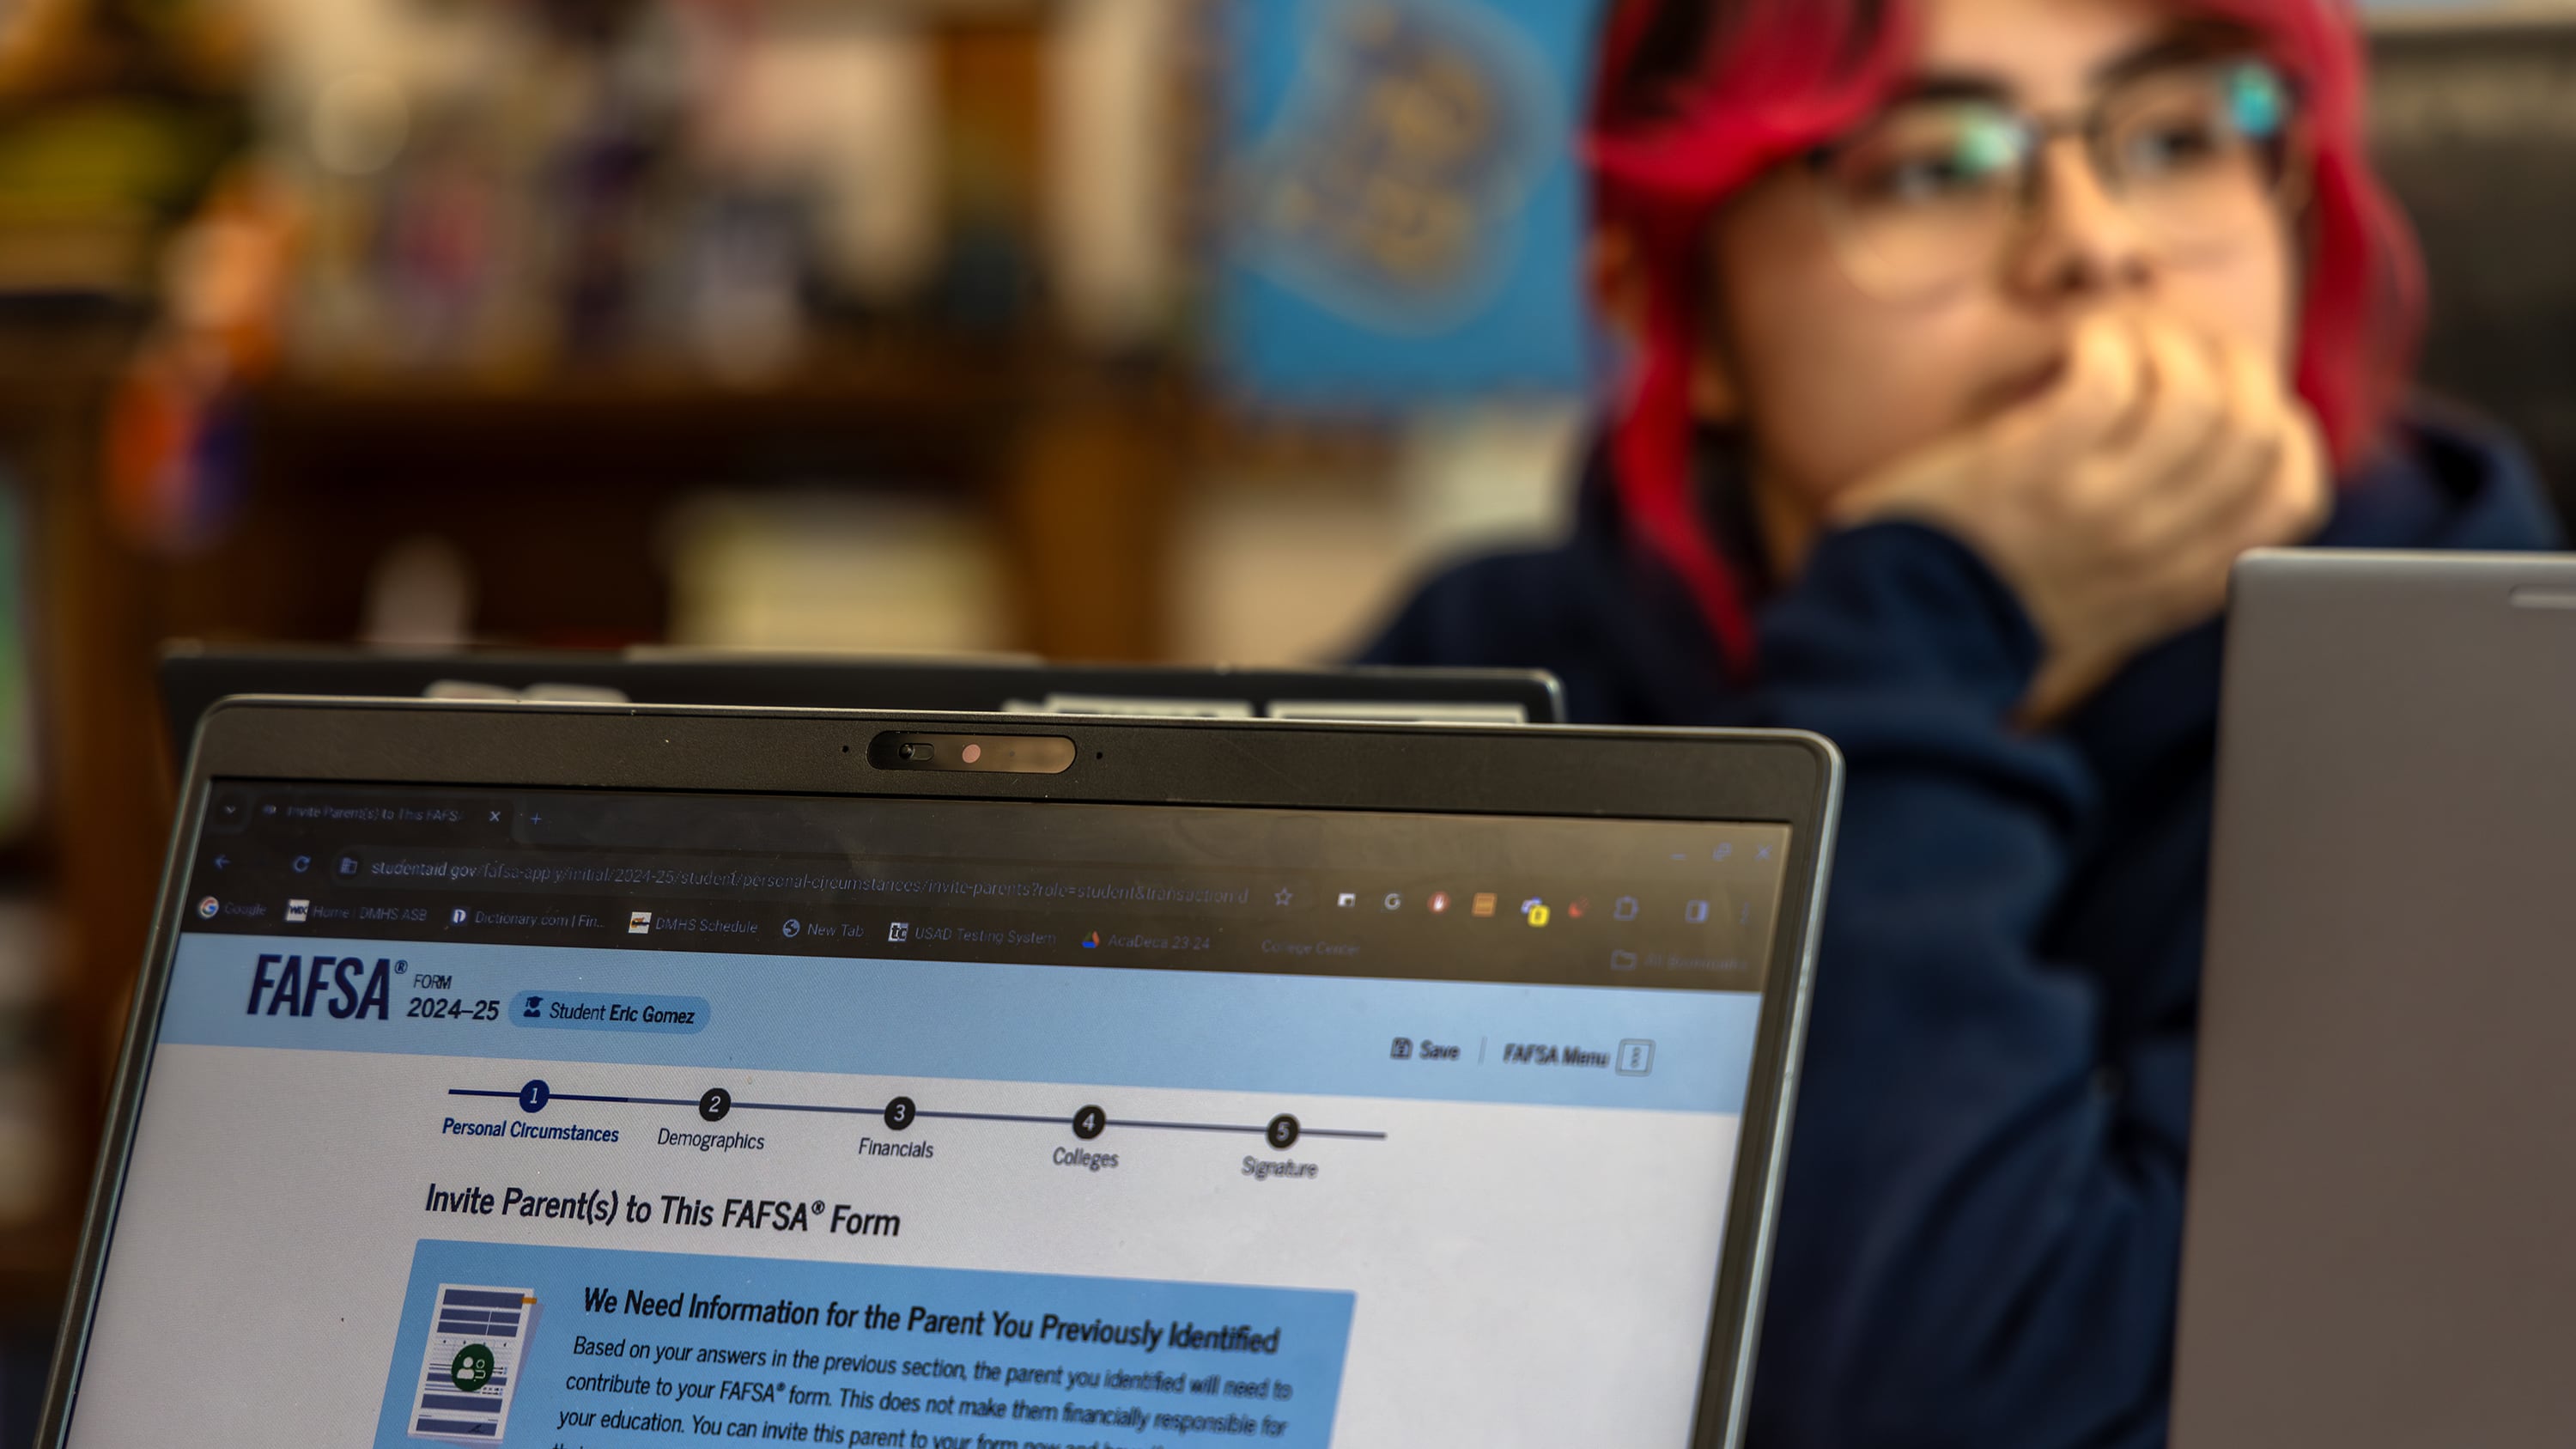 The top half of a laptop screen is in focus with the word "FAFSA" in view with a student wearing glasses and has red and black hair in the background.